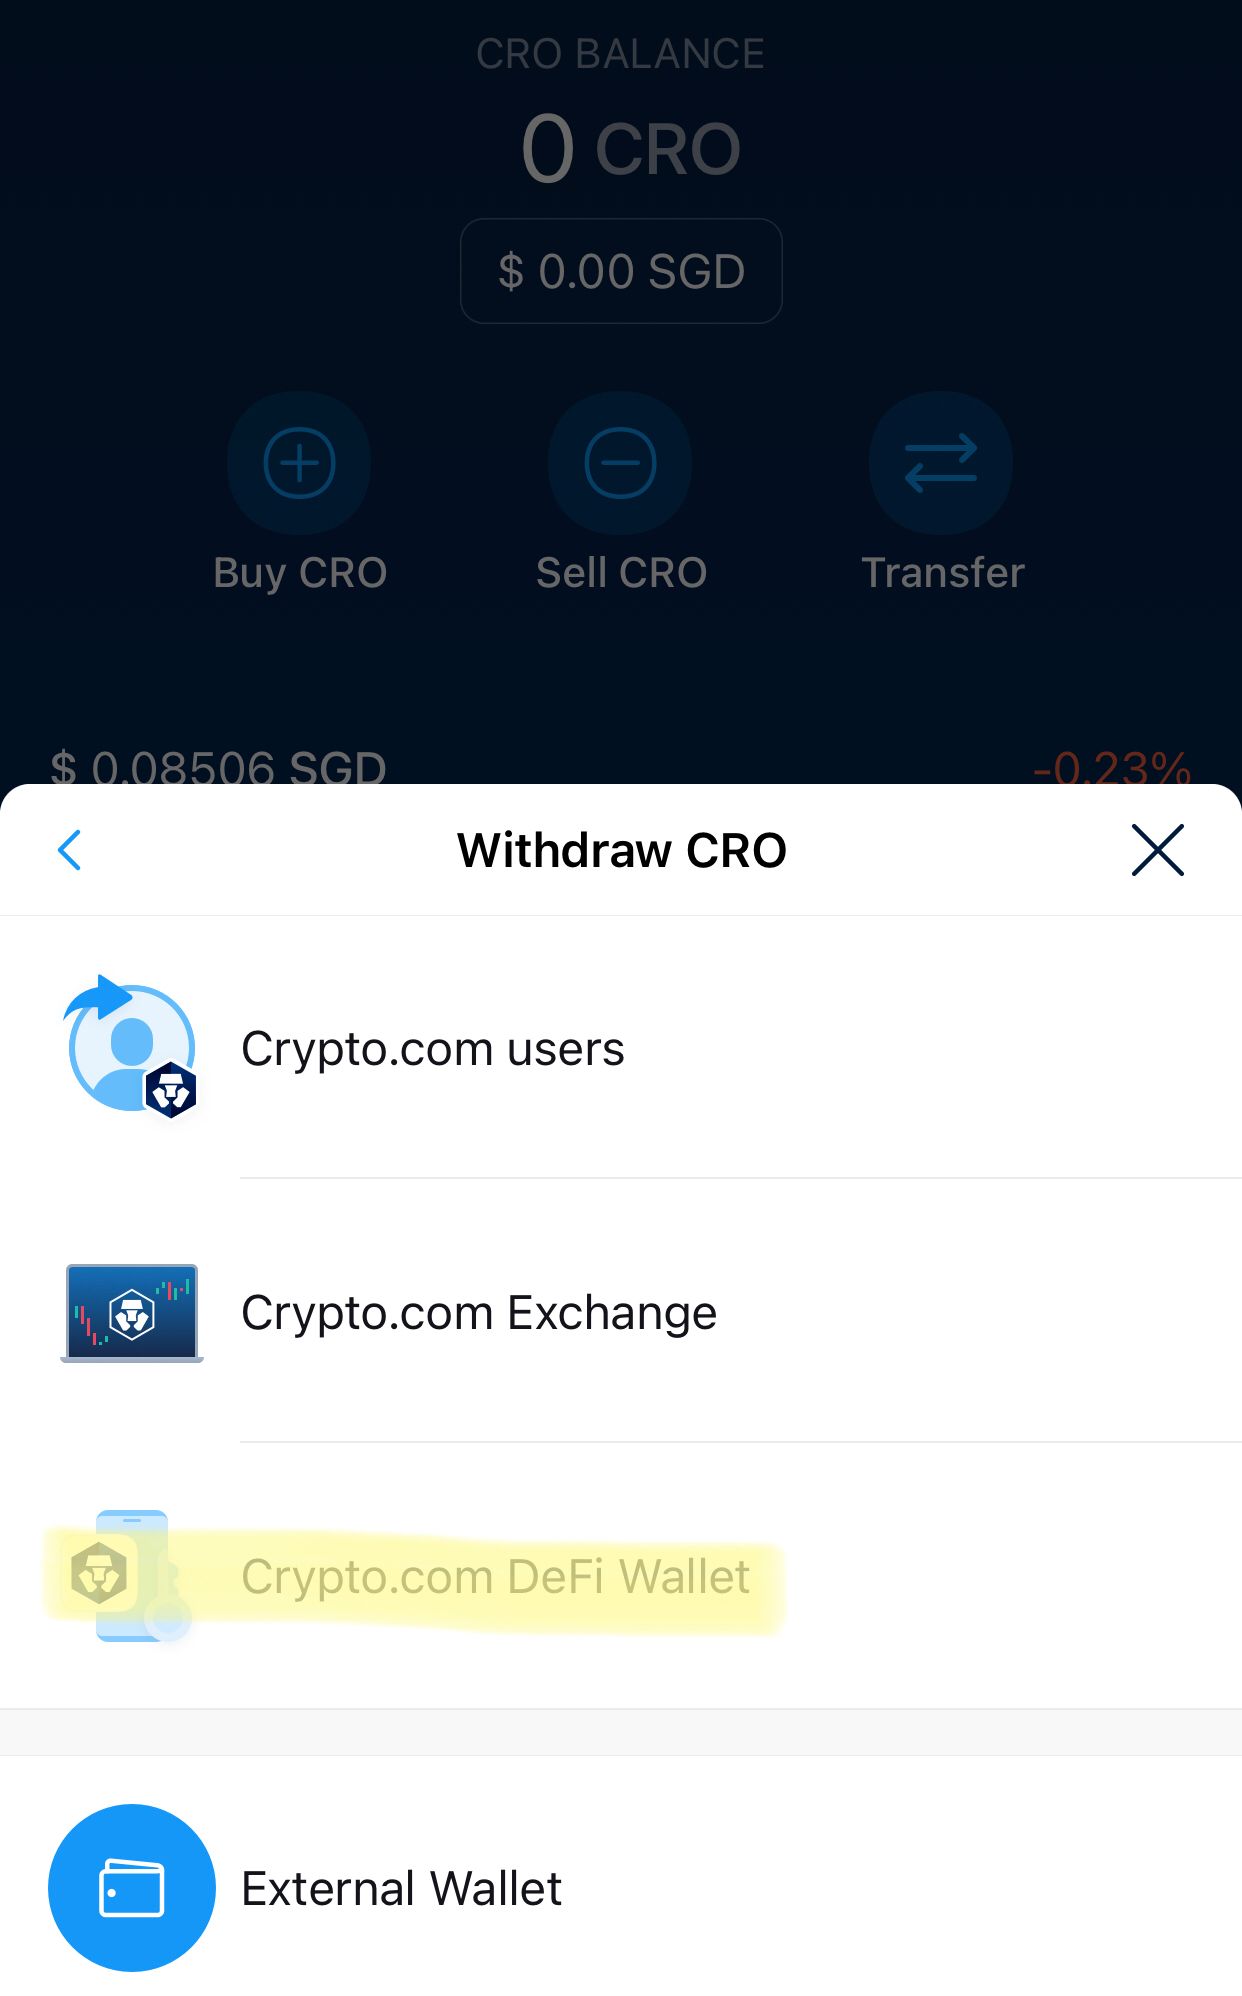 Withdraw to Wallet